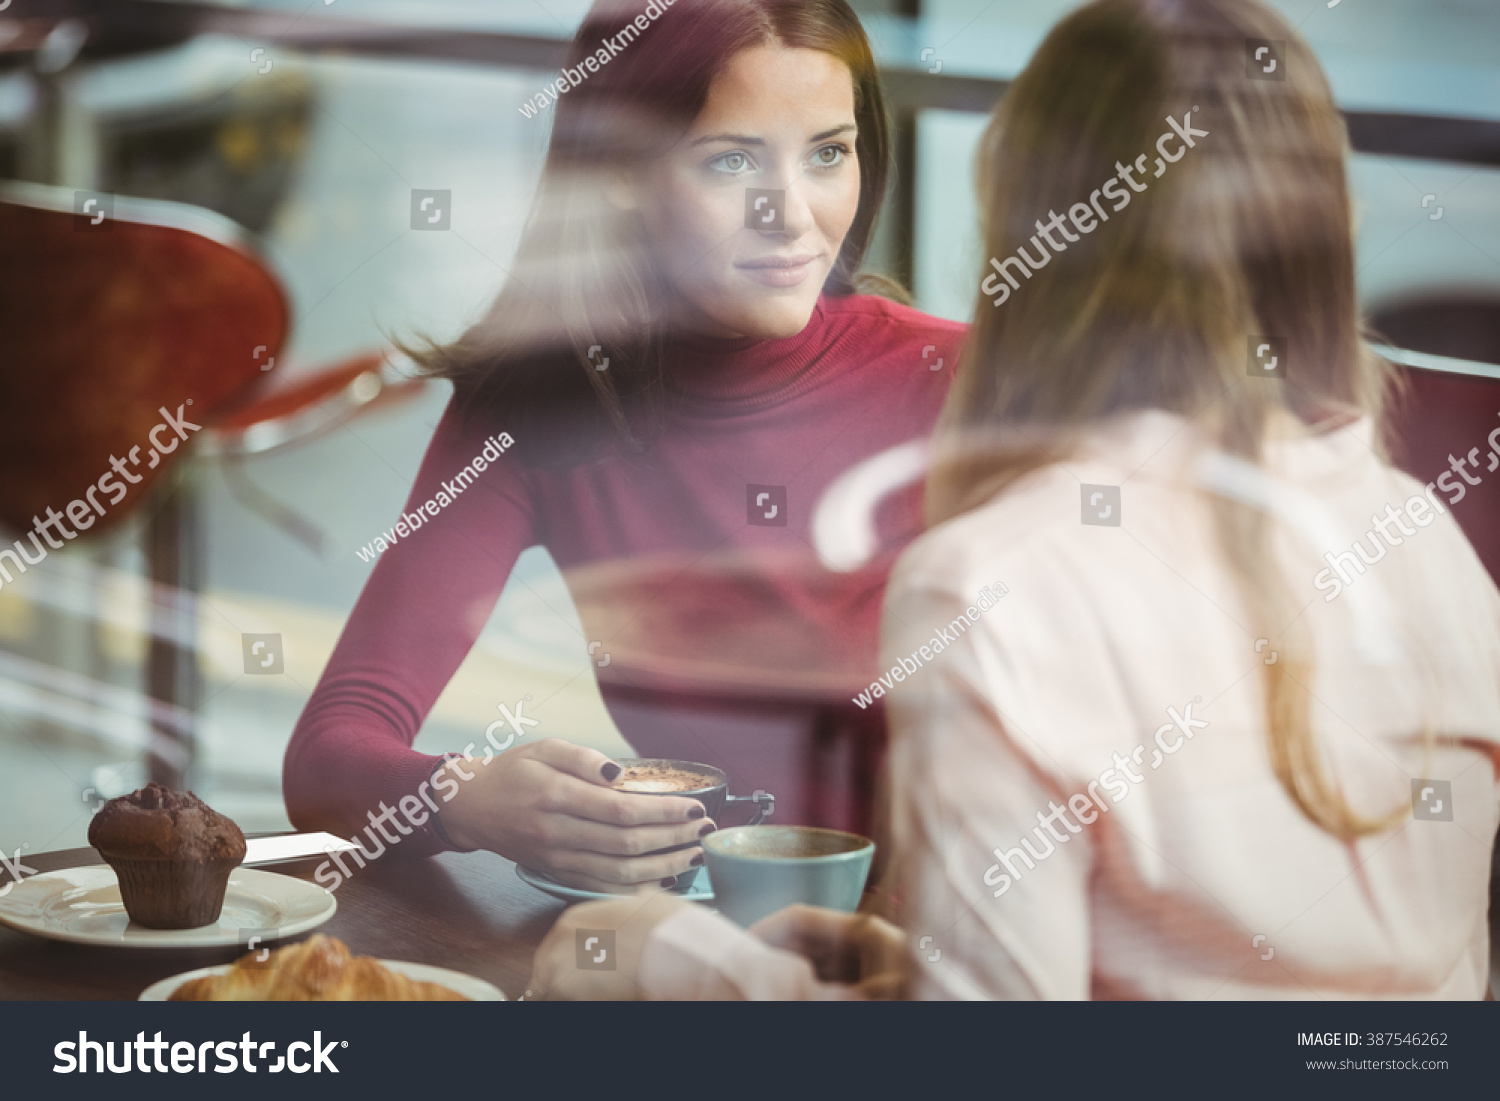 Pretty friends chatting over coffee in cafe #387546262